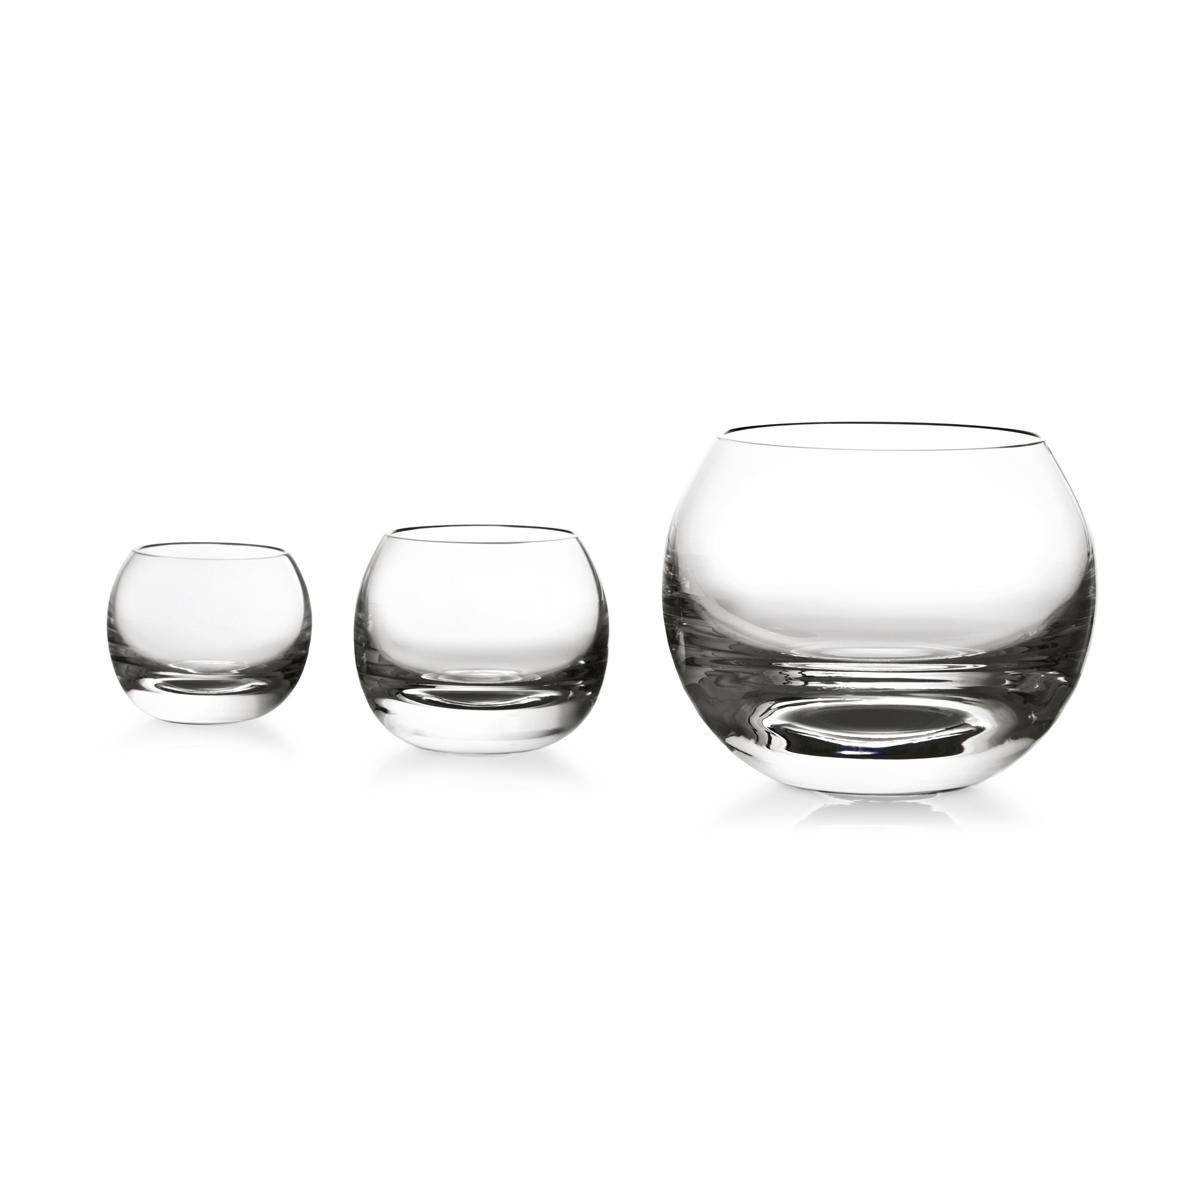 Liqueur glass made in blown in a mold glass. The Tulip collection is a glassware family by Aldo Cibic, who designed these pieces walking the line between classical and postmodern design. The boldly simple geometric forms are at once contemporary and